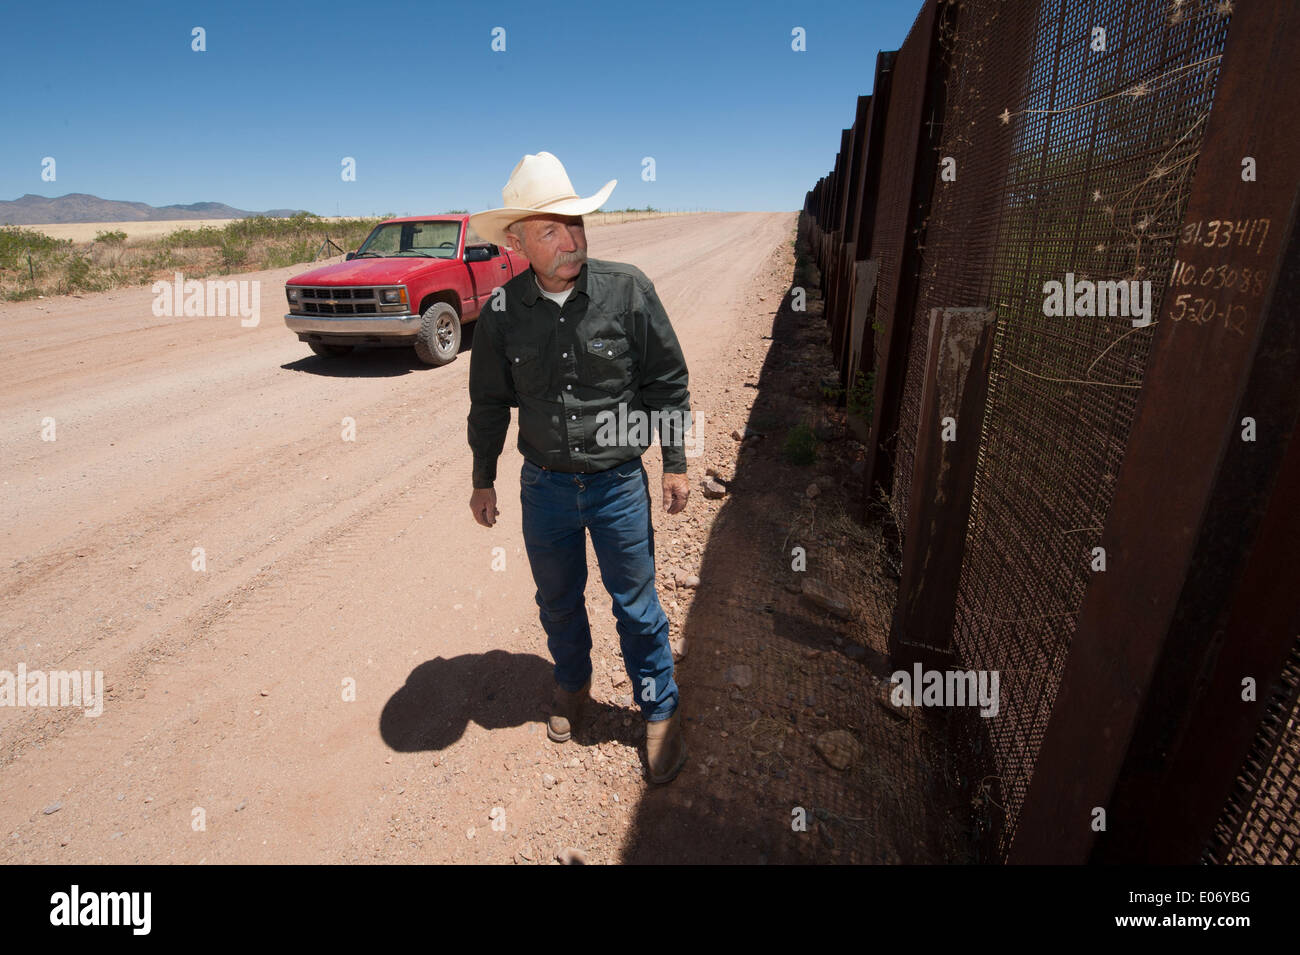 Naco, Arizona, USA. 28th Apr, 2014. Arizona cattle rancher JOHN LADD's ranch near Naco, Ariz., abuts the border fence separating the U.S. and Mexico. Over the years he's had problems caused by both smugglers and U.S. Border Patrol agents including damage to his property, livestock and grass. Ladd looks at a section of border fence repaired in 2012 after smugglers cut a hole in it and drove trucks through his property. © Will Seberger/ZUMAPRESS.com/Alamy Live News Stock Photo